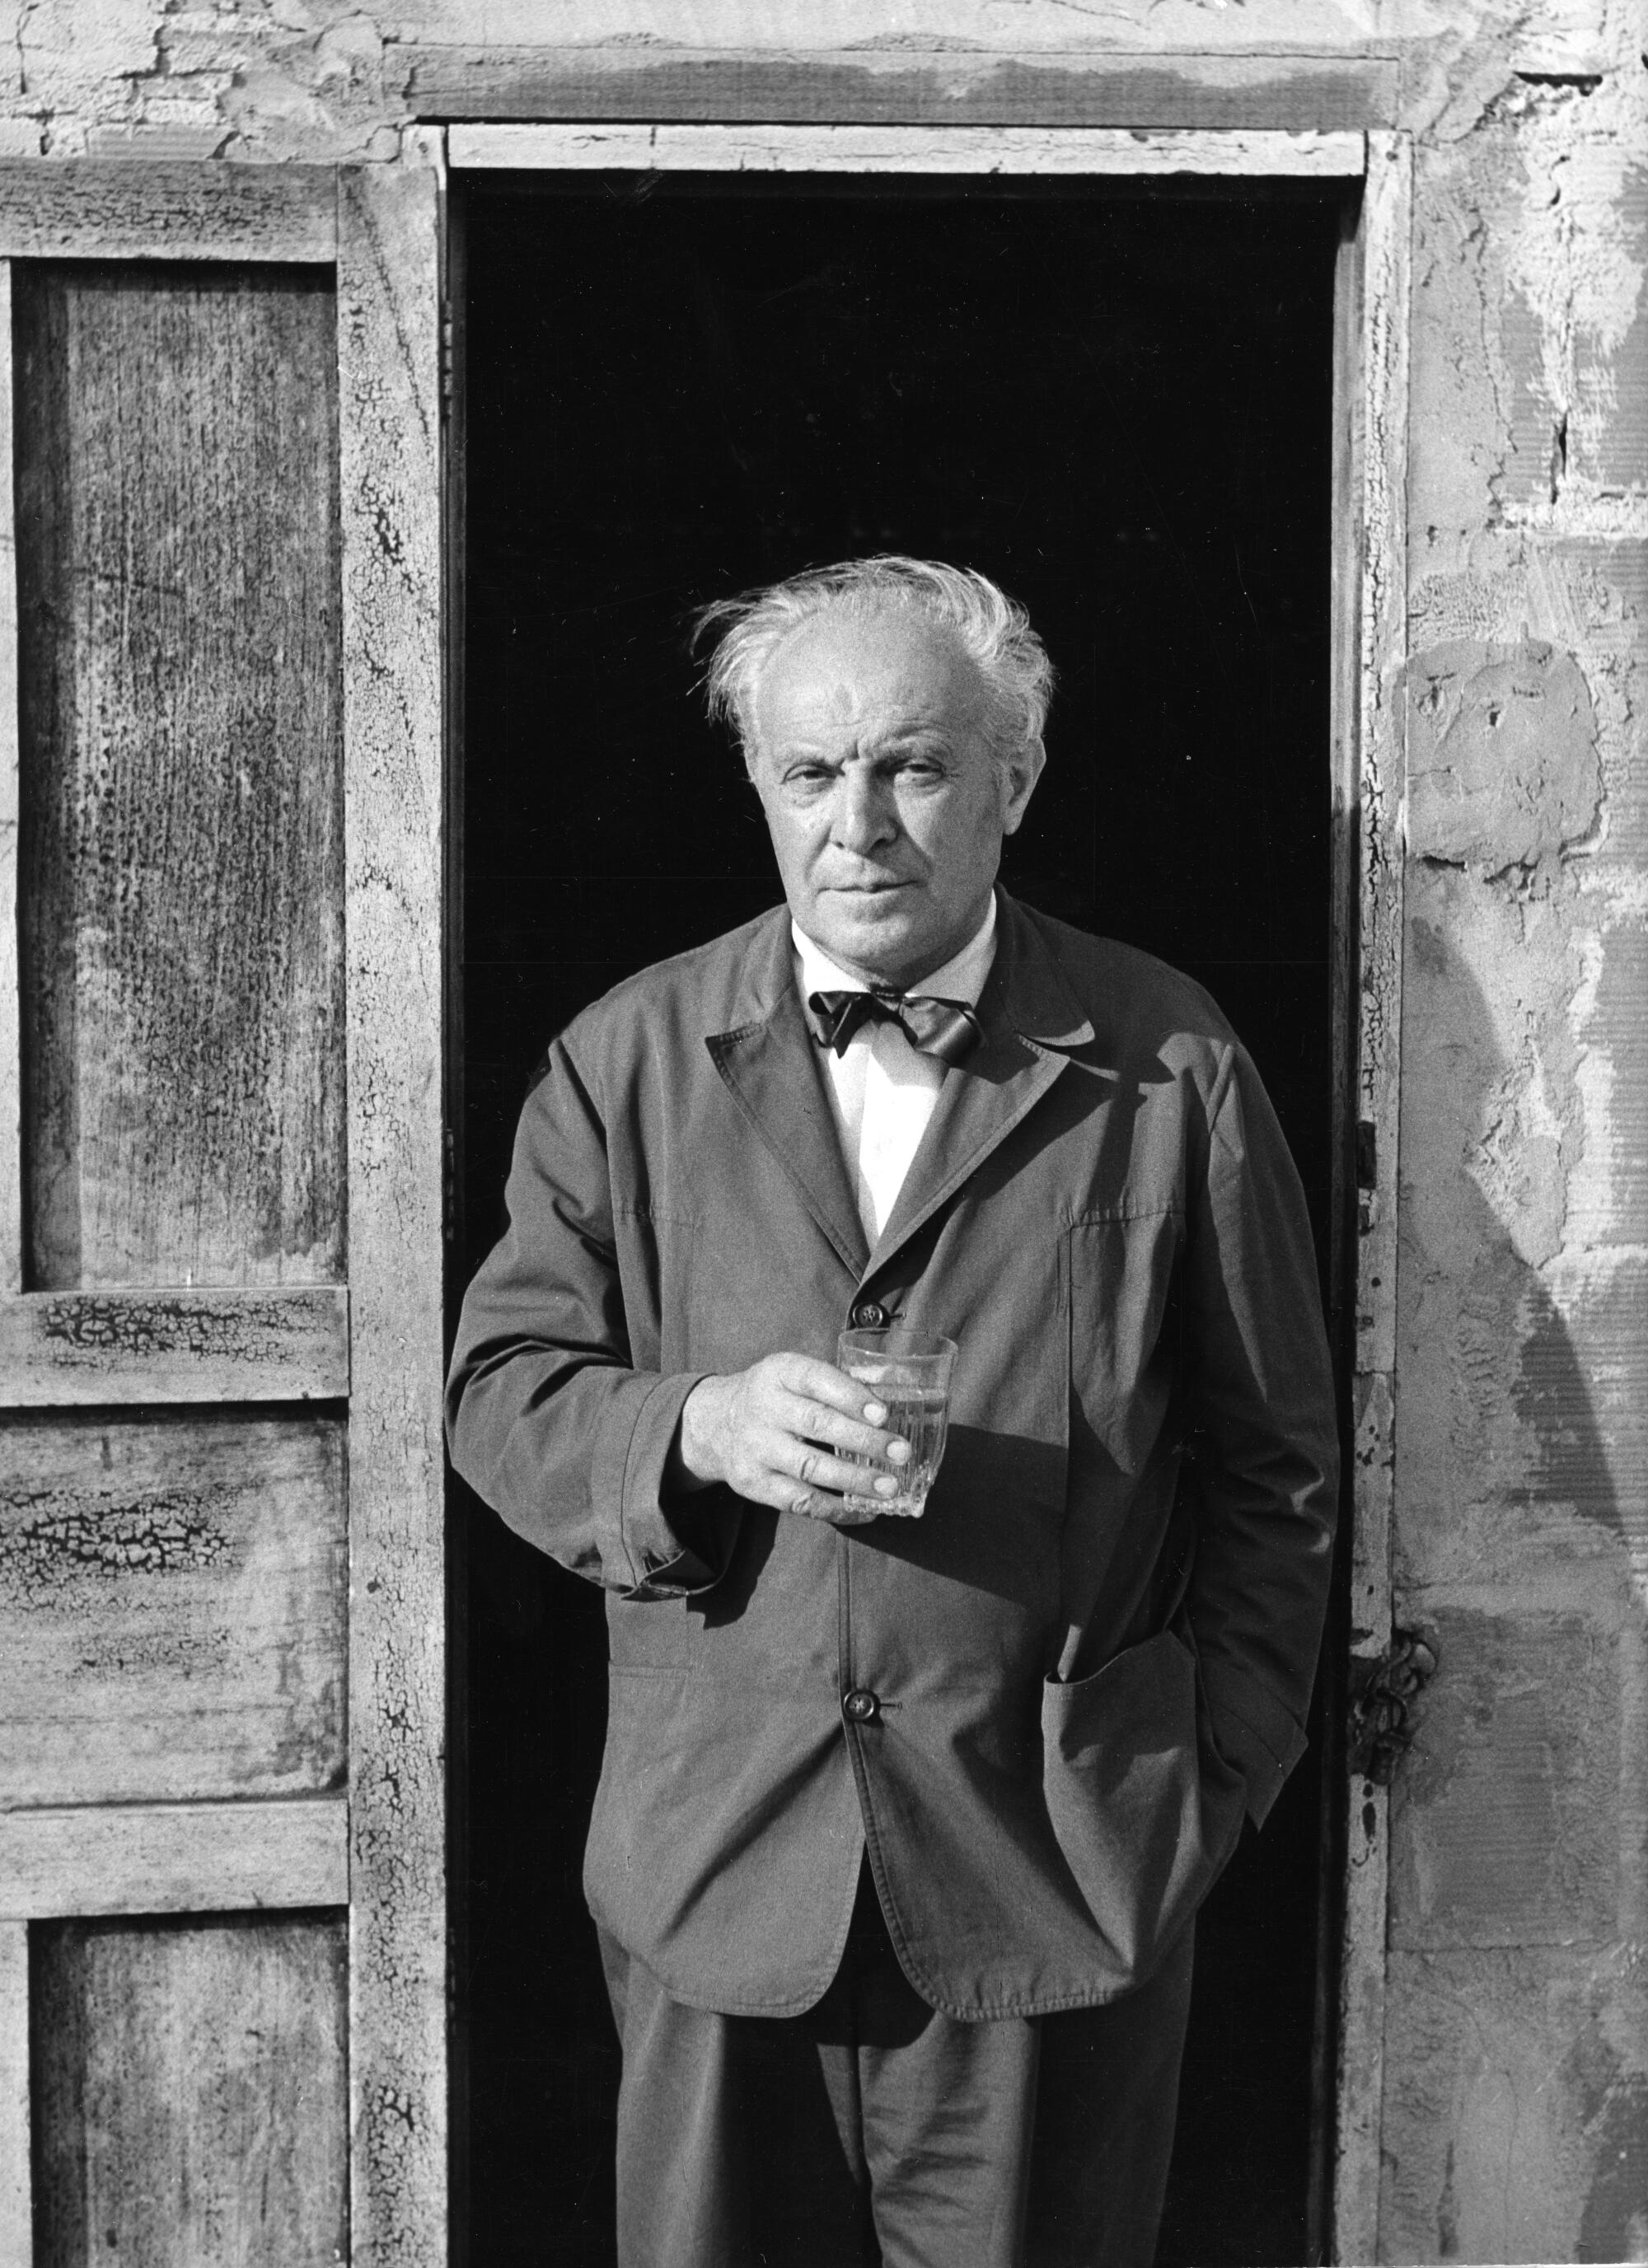 Gio Ponti, in a workman's jacket and bow tie, stands in the doorway of a rough-hewn building